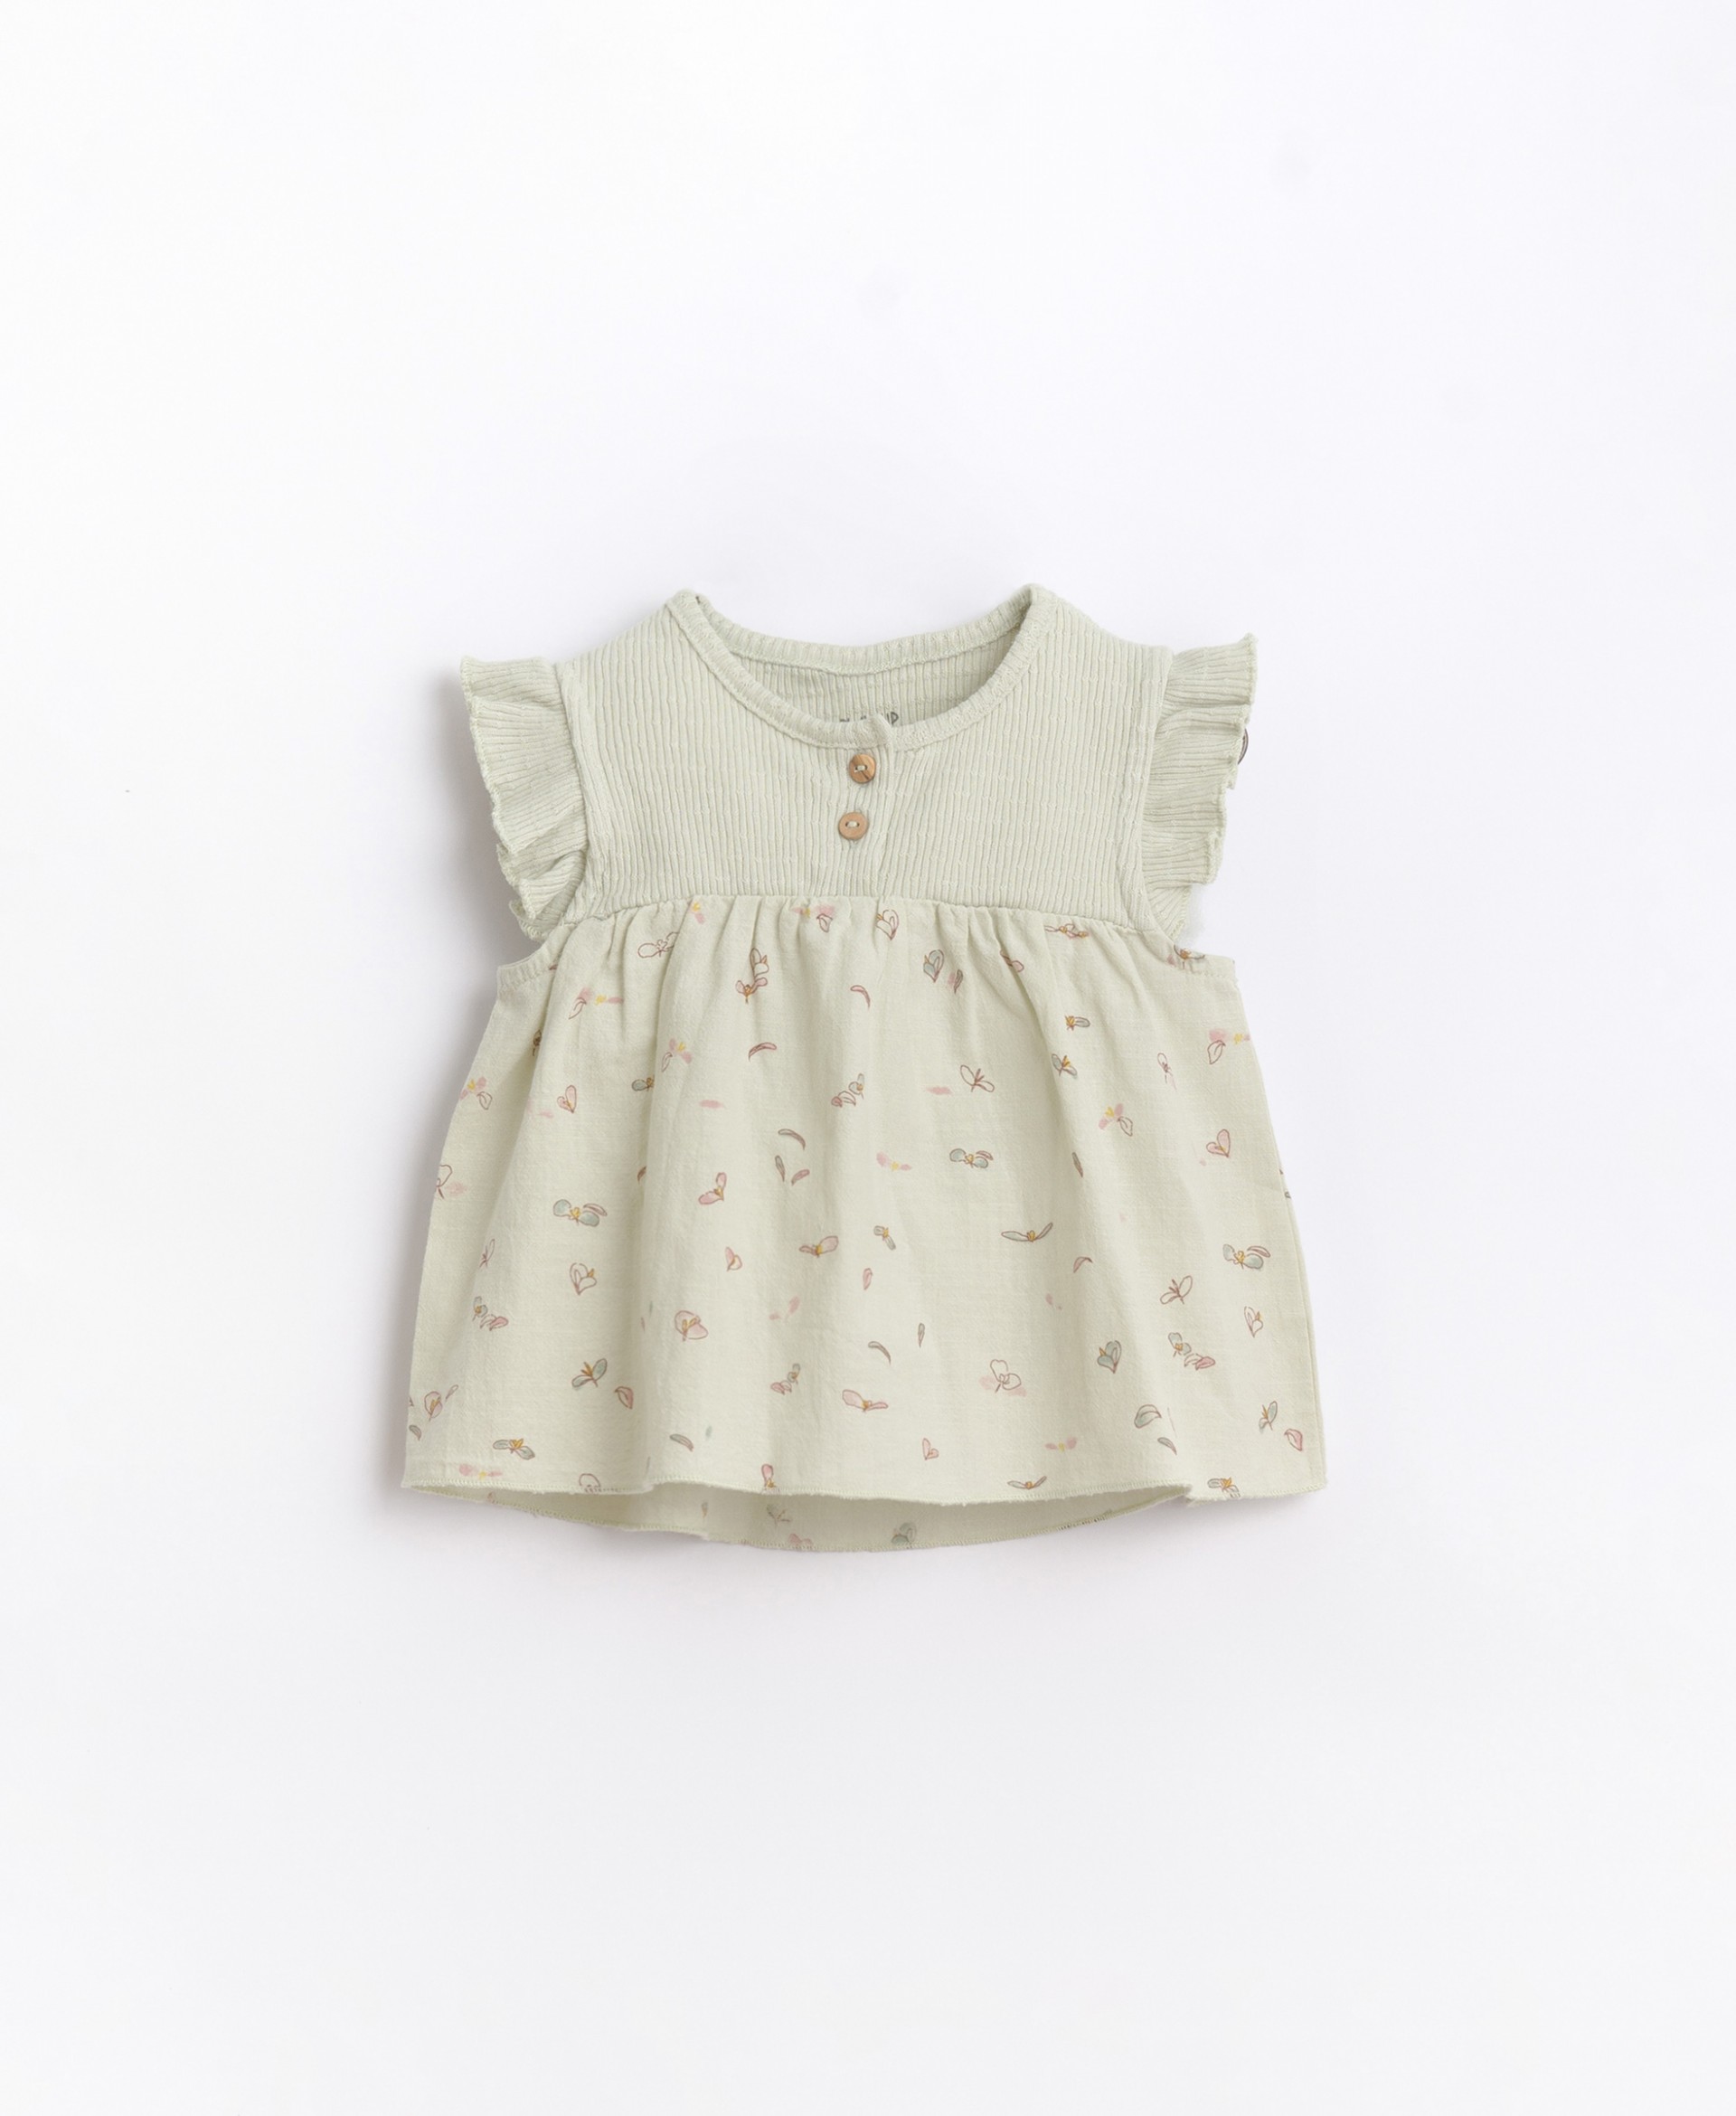 Top with decorative ruffle | Basketry